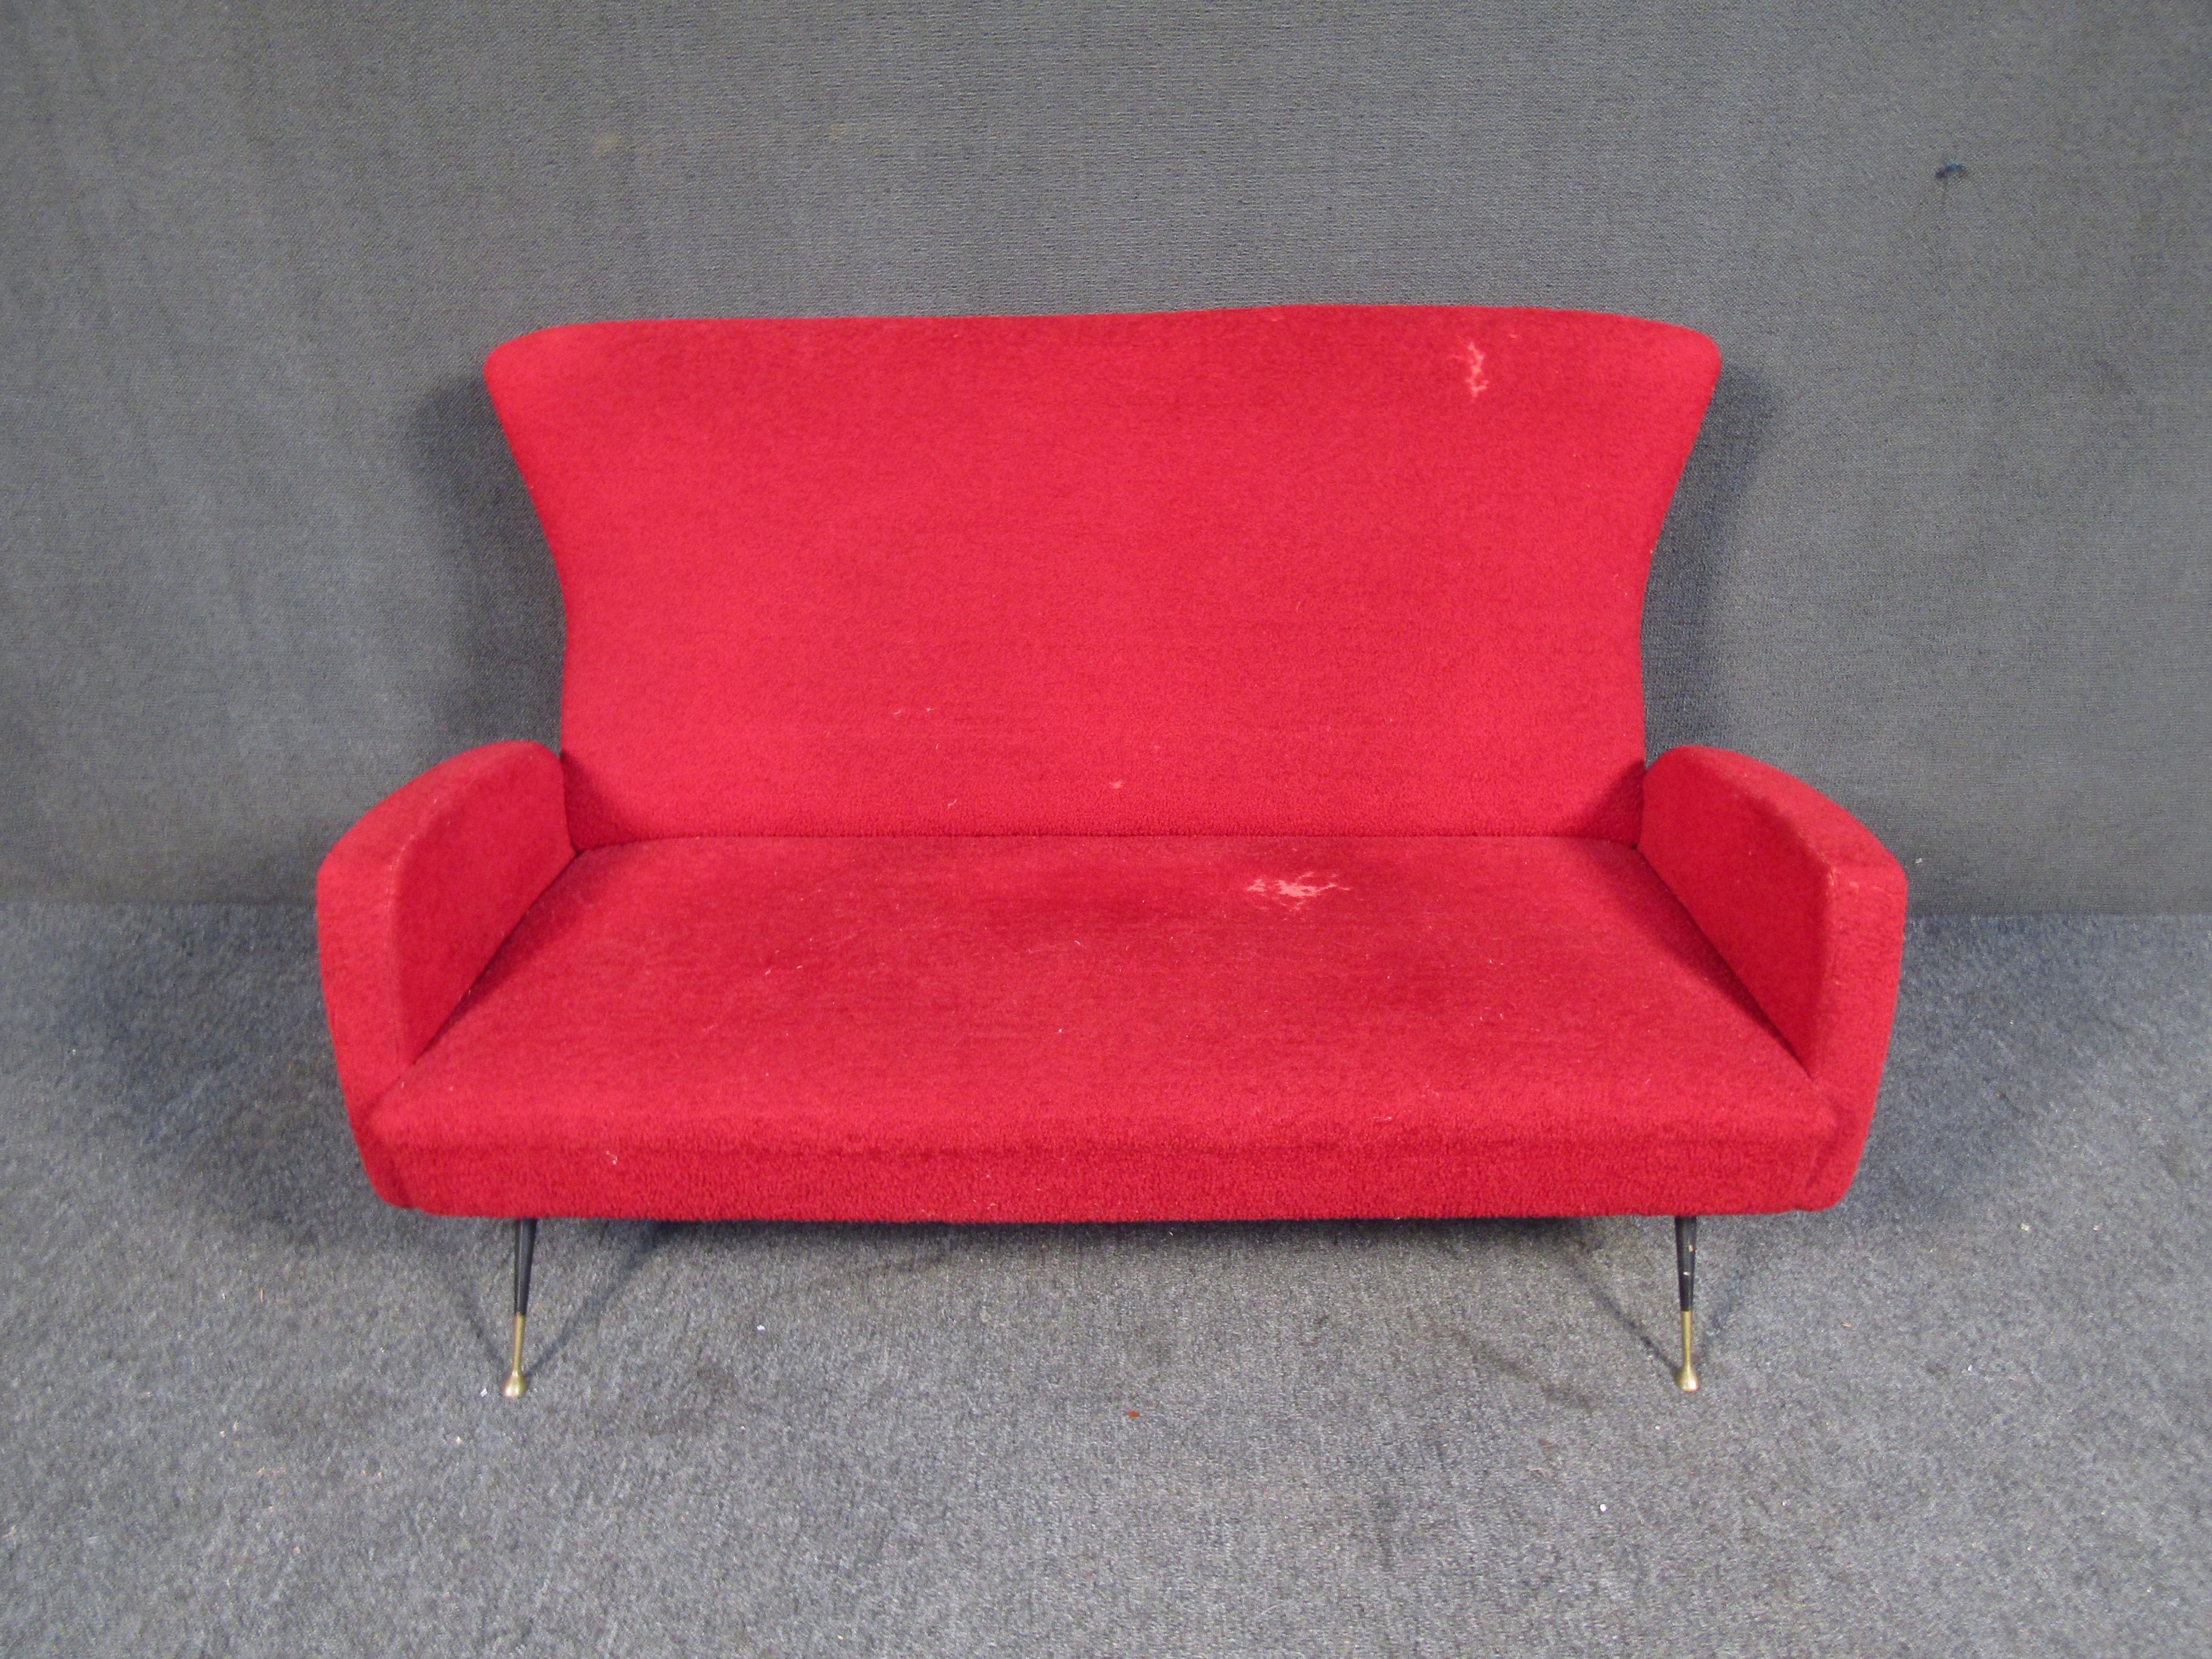 This Wingbacked loveseat is covered in red fluffy fabric and features, tapered metal legs with brass feet. A very unique eye catching piece that would add pop and a bit of flare to any room. 

Please confirm item location with dealer (NJ or